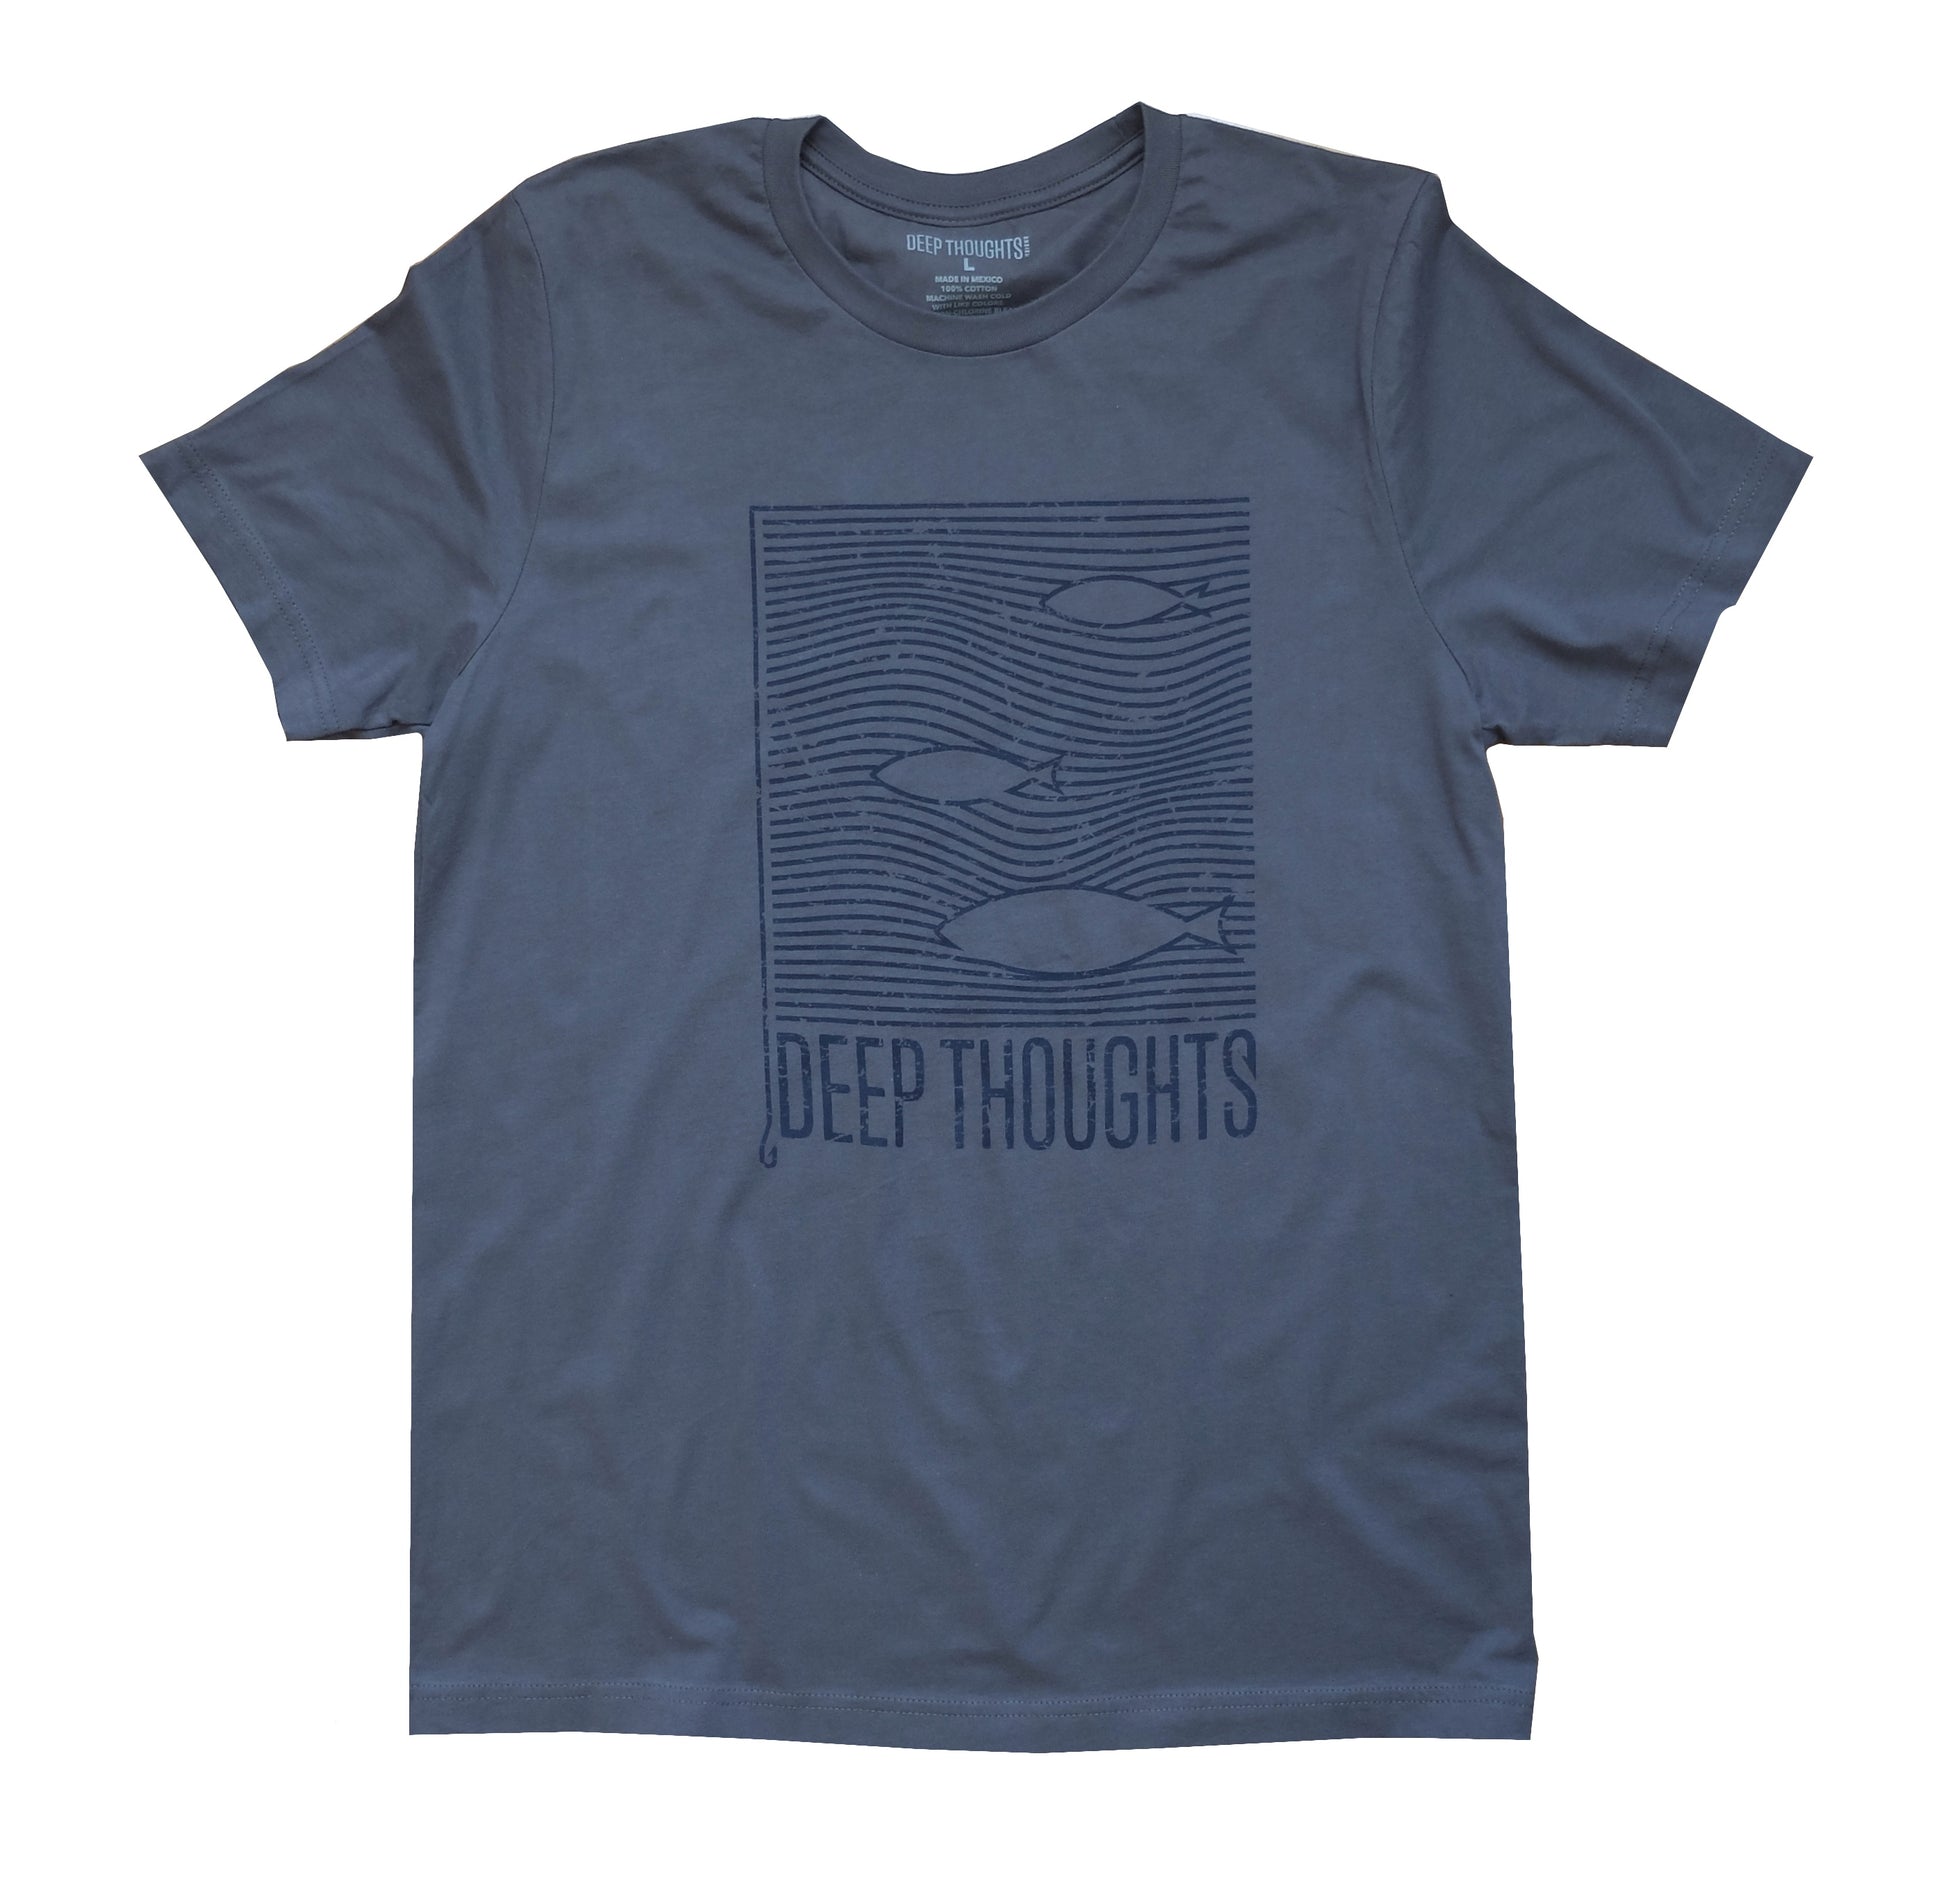  asphalt grey cotton t-shirt with navy blue print showing fish swimming among wavy line ocean currents